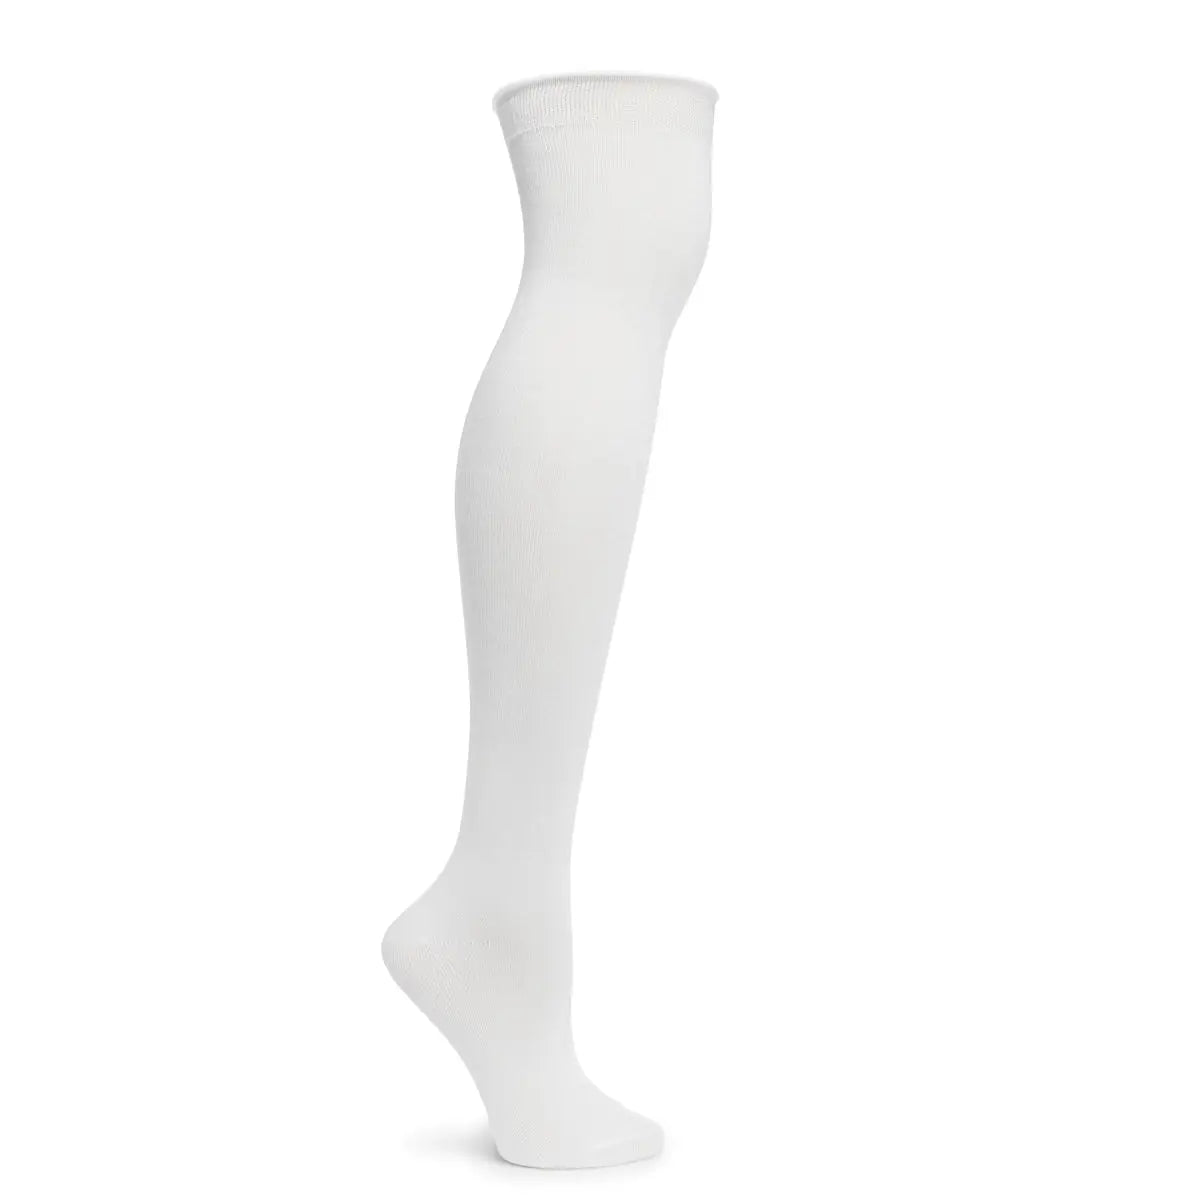 Women's Pima Cotton Knee High Socks with Roll Top in White - The Sockery